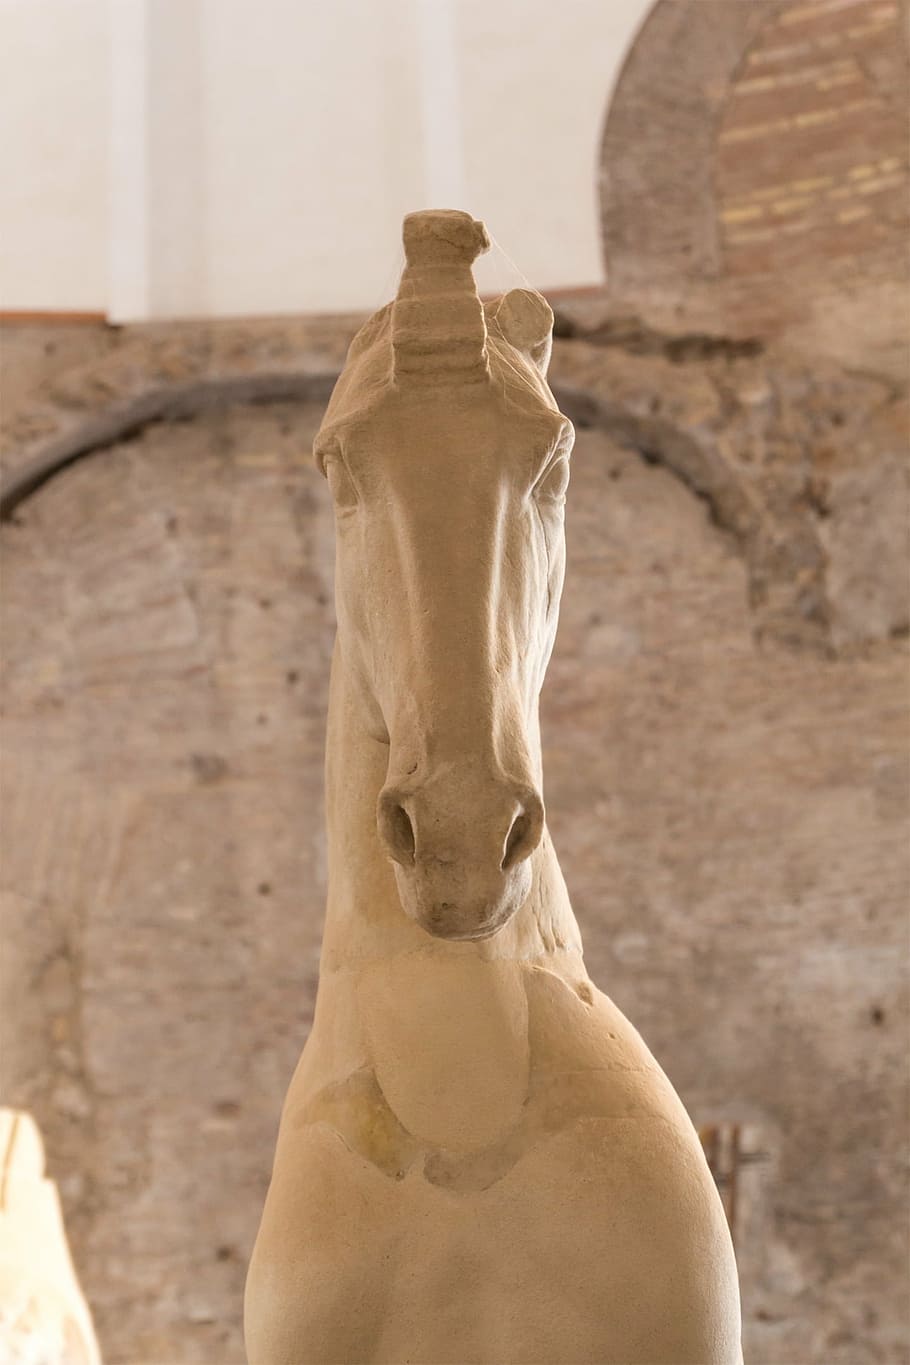 horse, statue, rome, italy, marble, antique, stature, focus on foreground, rear view, day